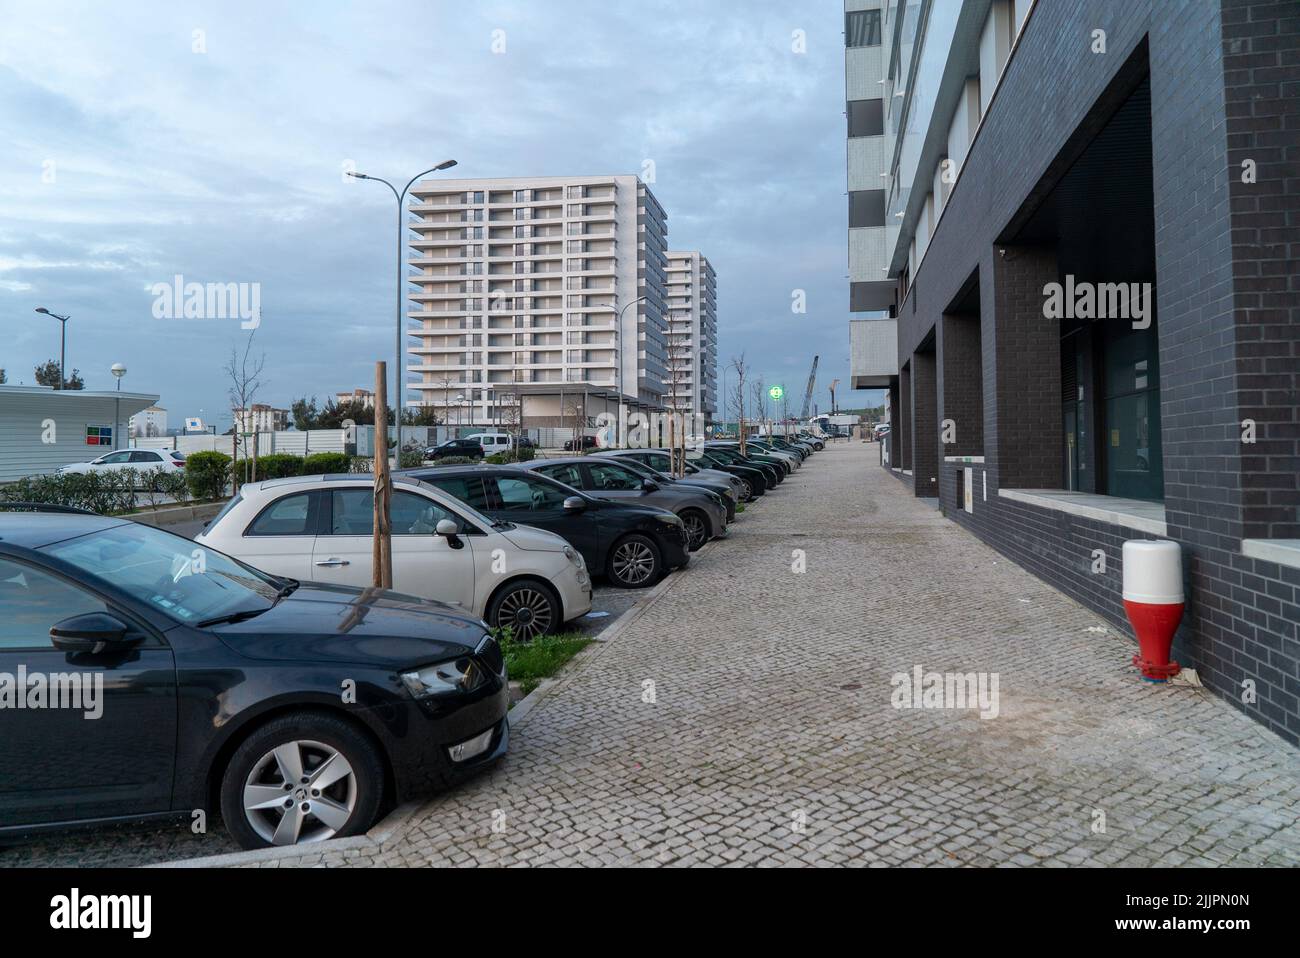 A street with parked cars surrounded by similar buildings during the day in Lisbon, Portugal Stock Photo